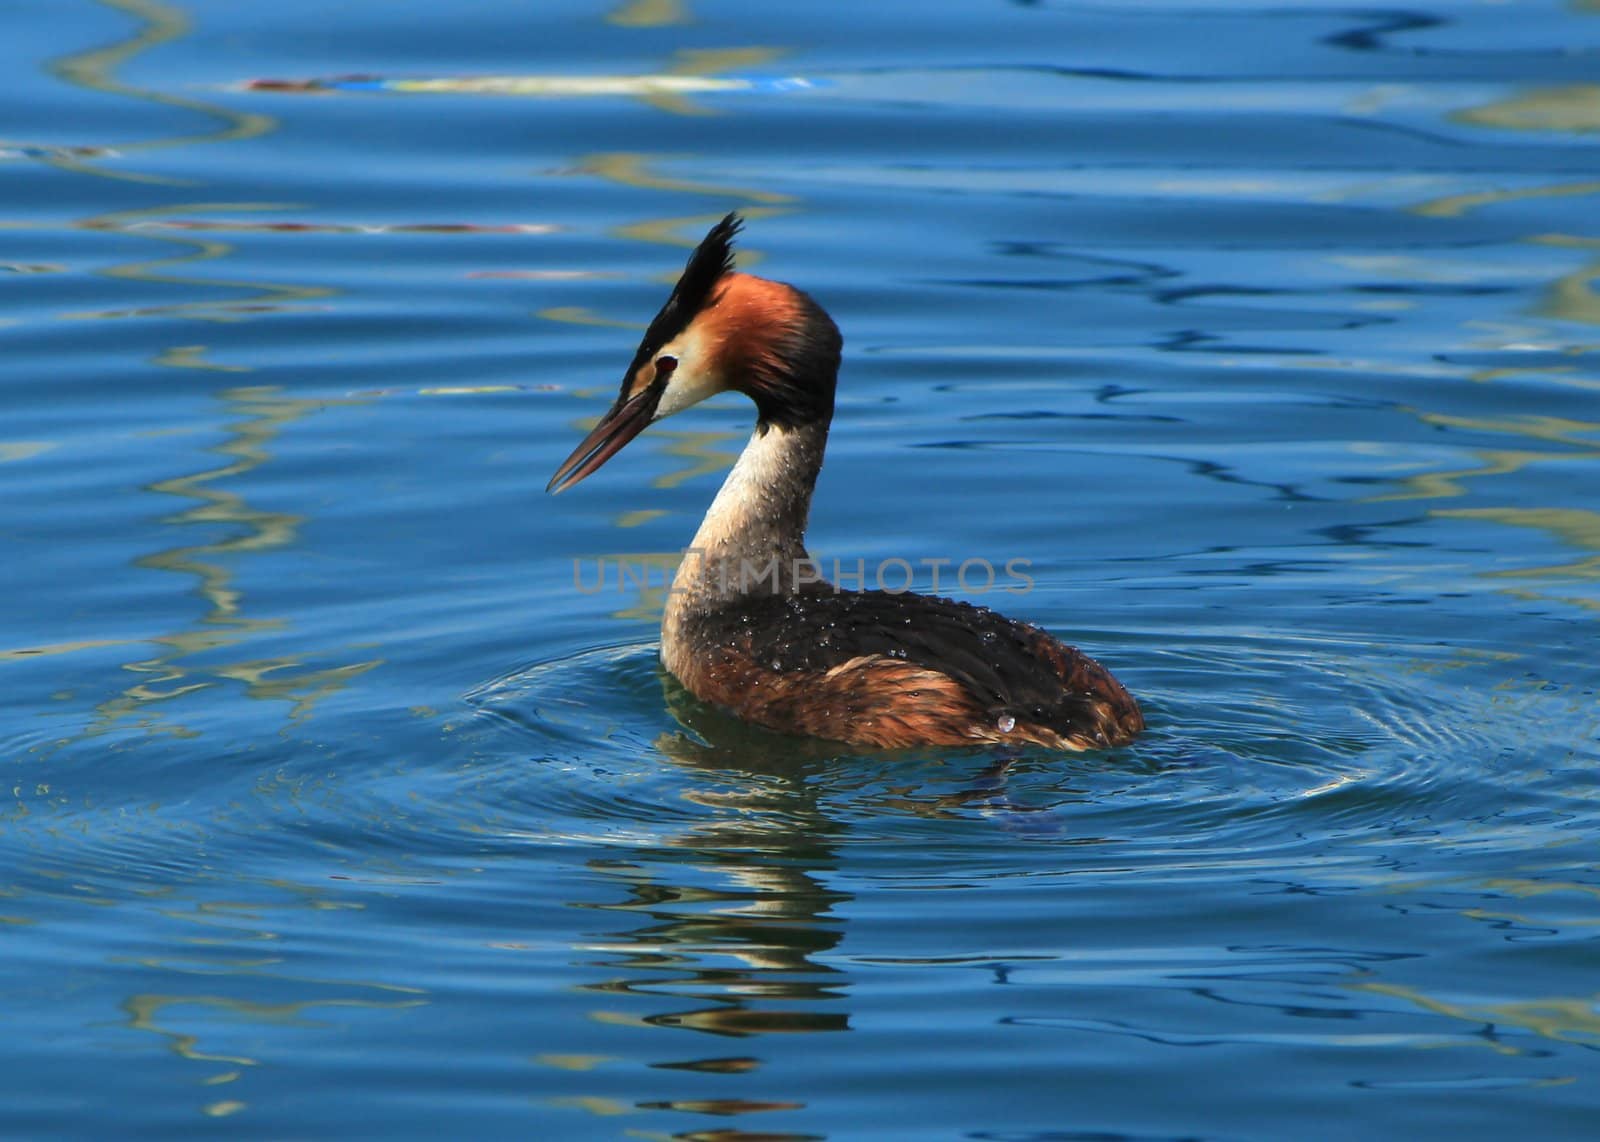 Great crested grebe duck by Elenaphotos21